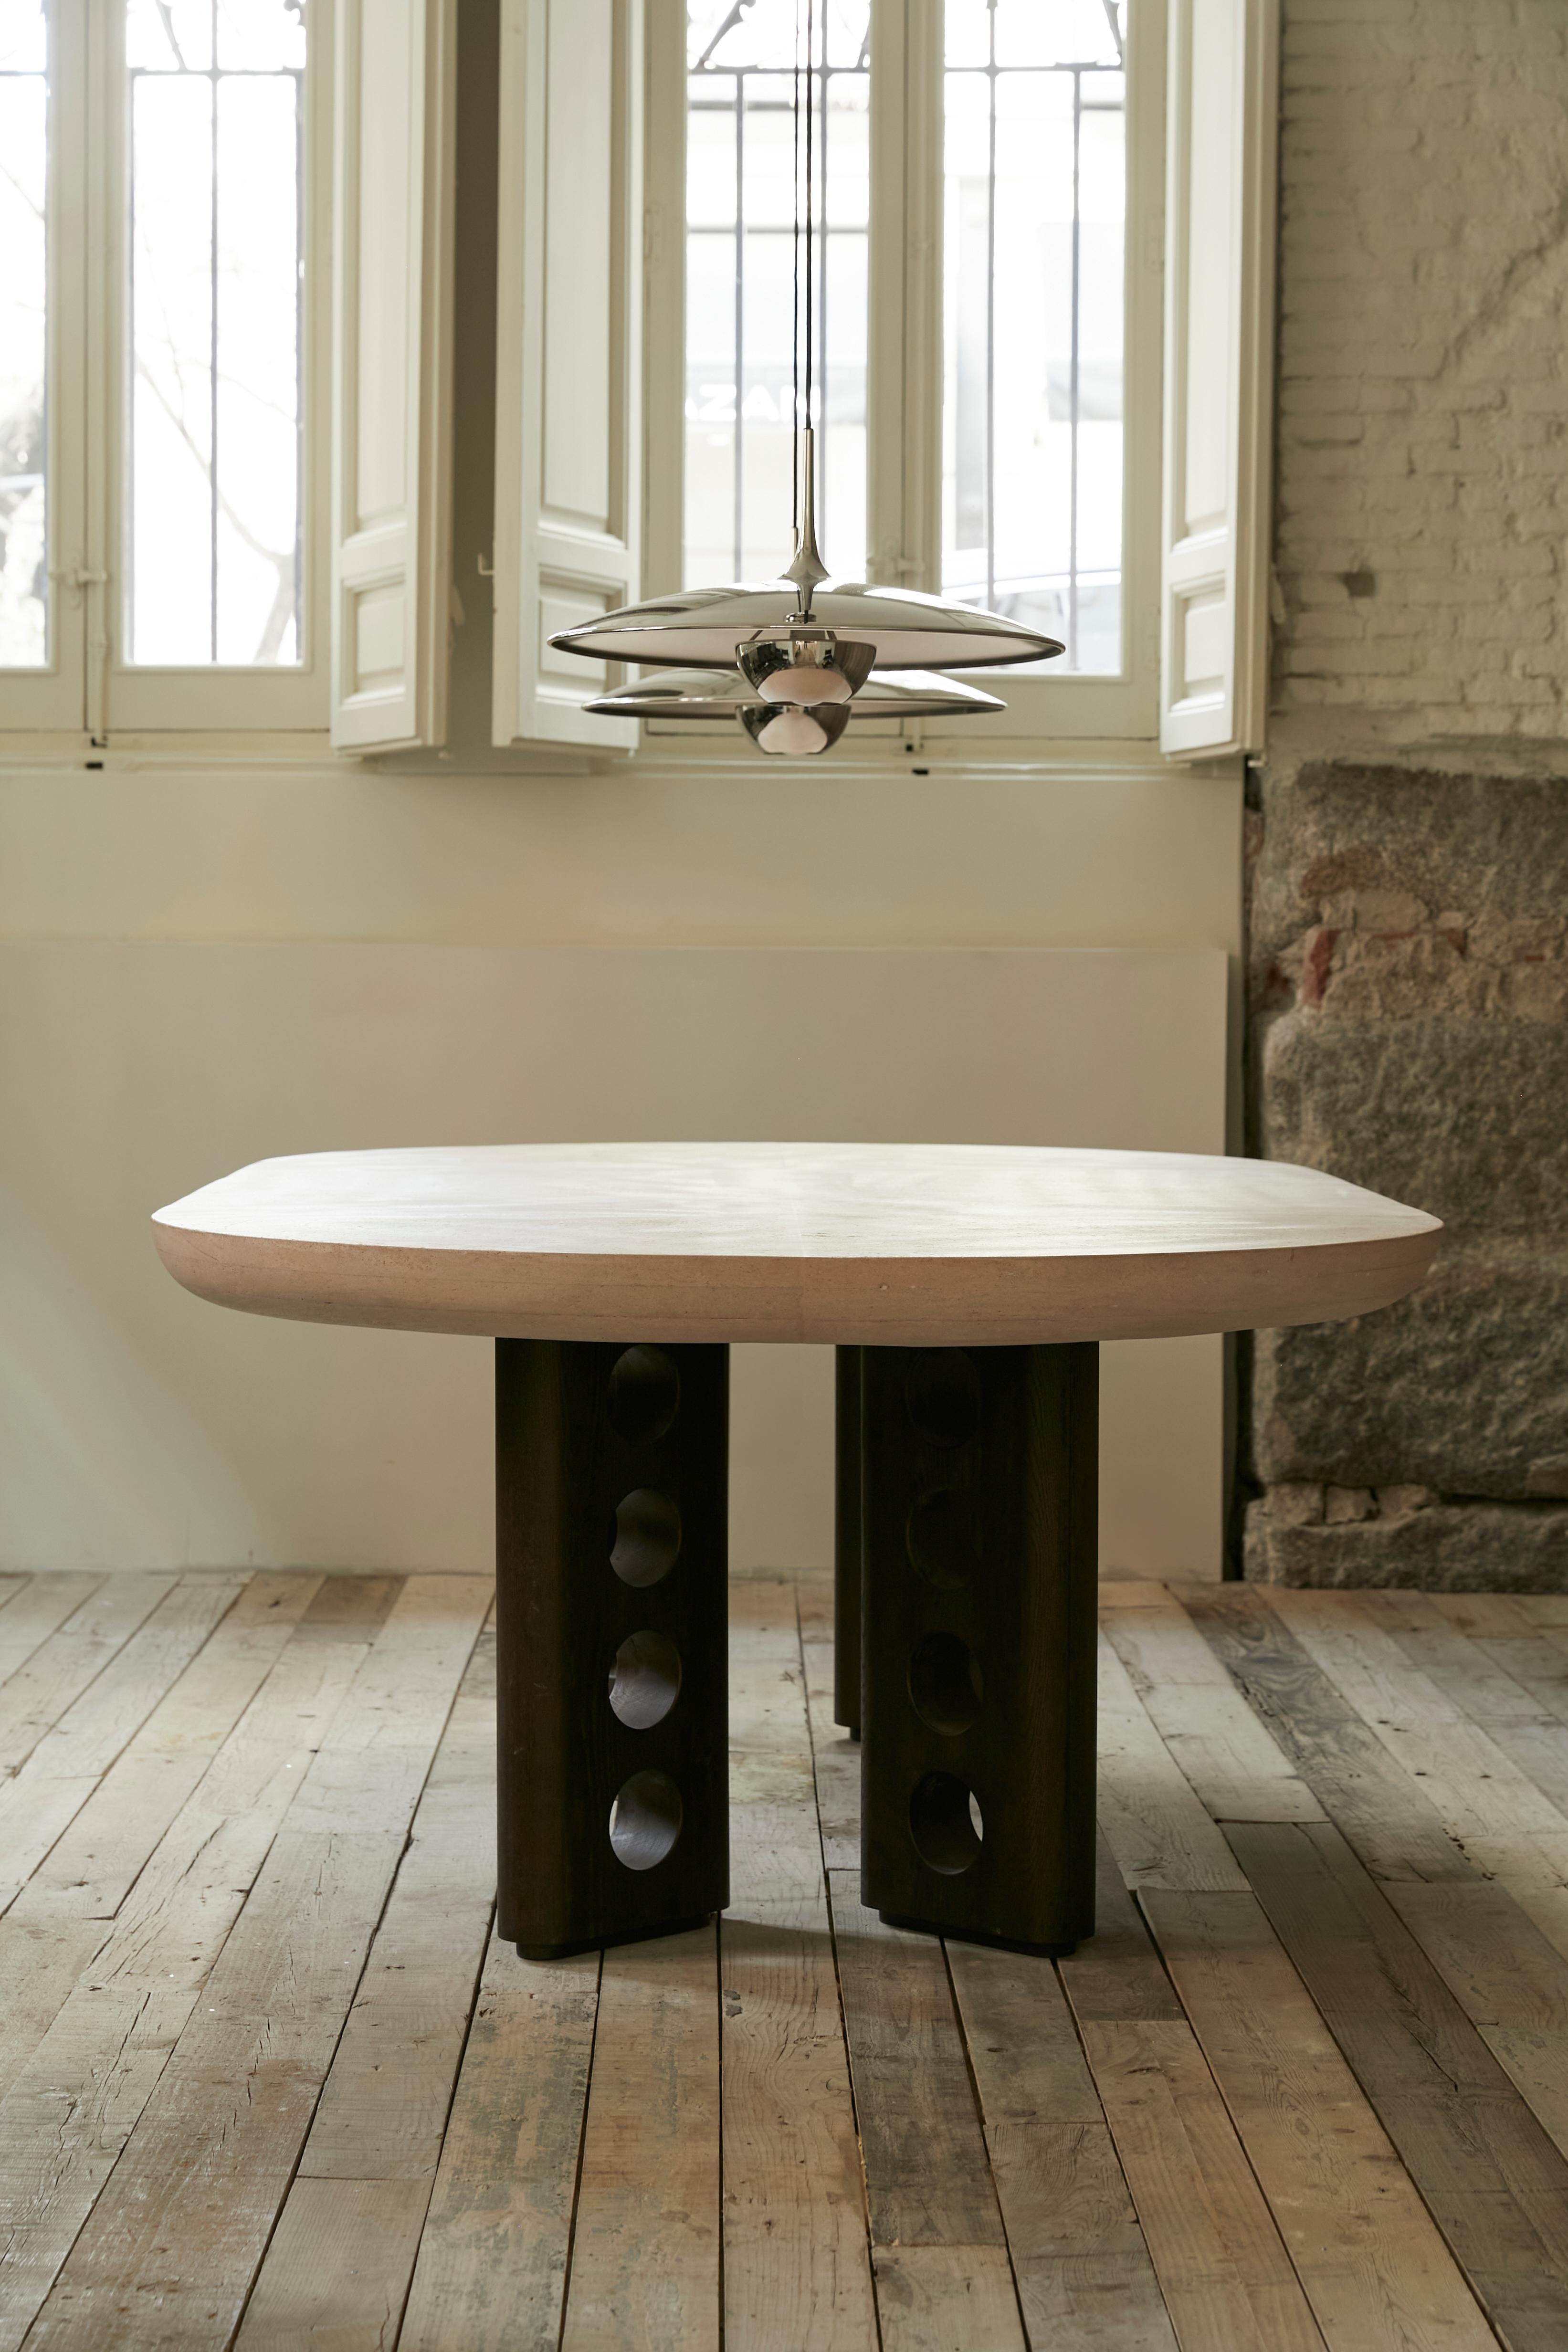 Sepúlveda stone dining table designed by S+DLH. With handcarved walnut legs and Stone tabletop, this table is completely customizable, as both the dimentions and the type of stone can be changed to adapt to any taste or need. 7670